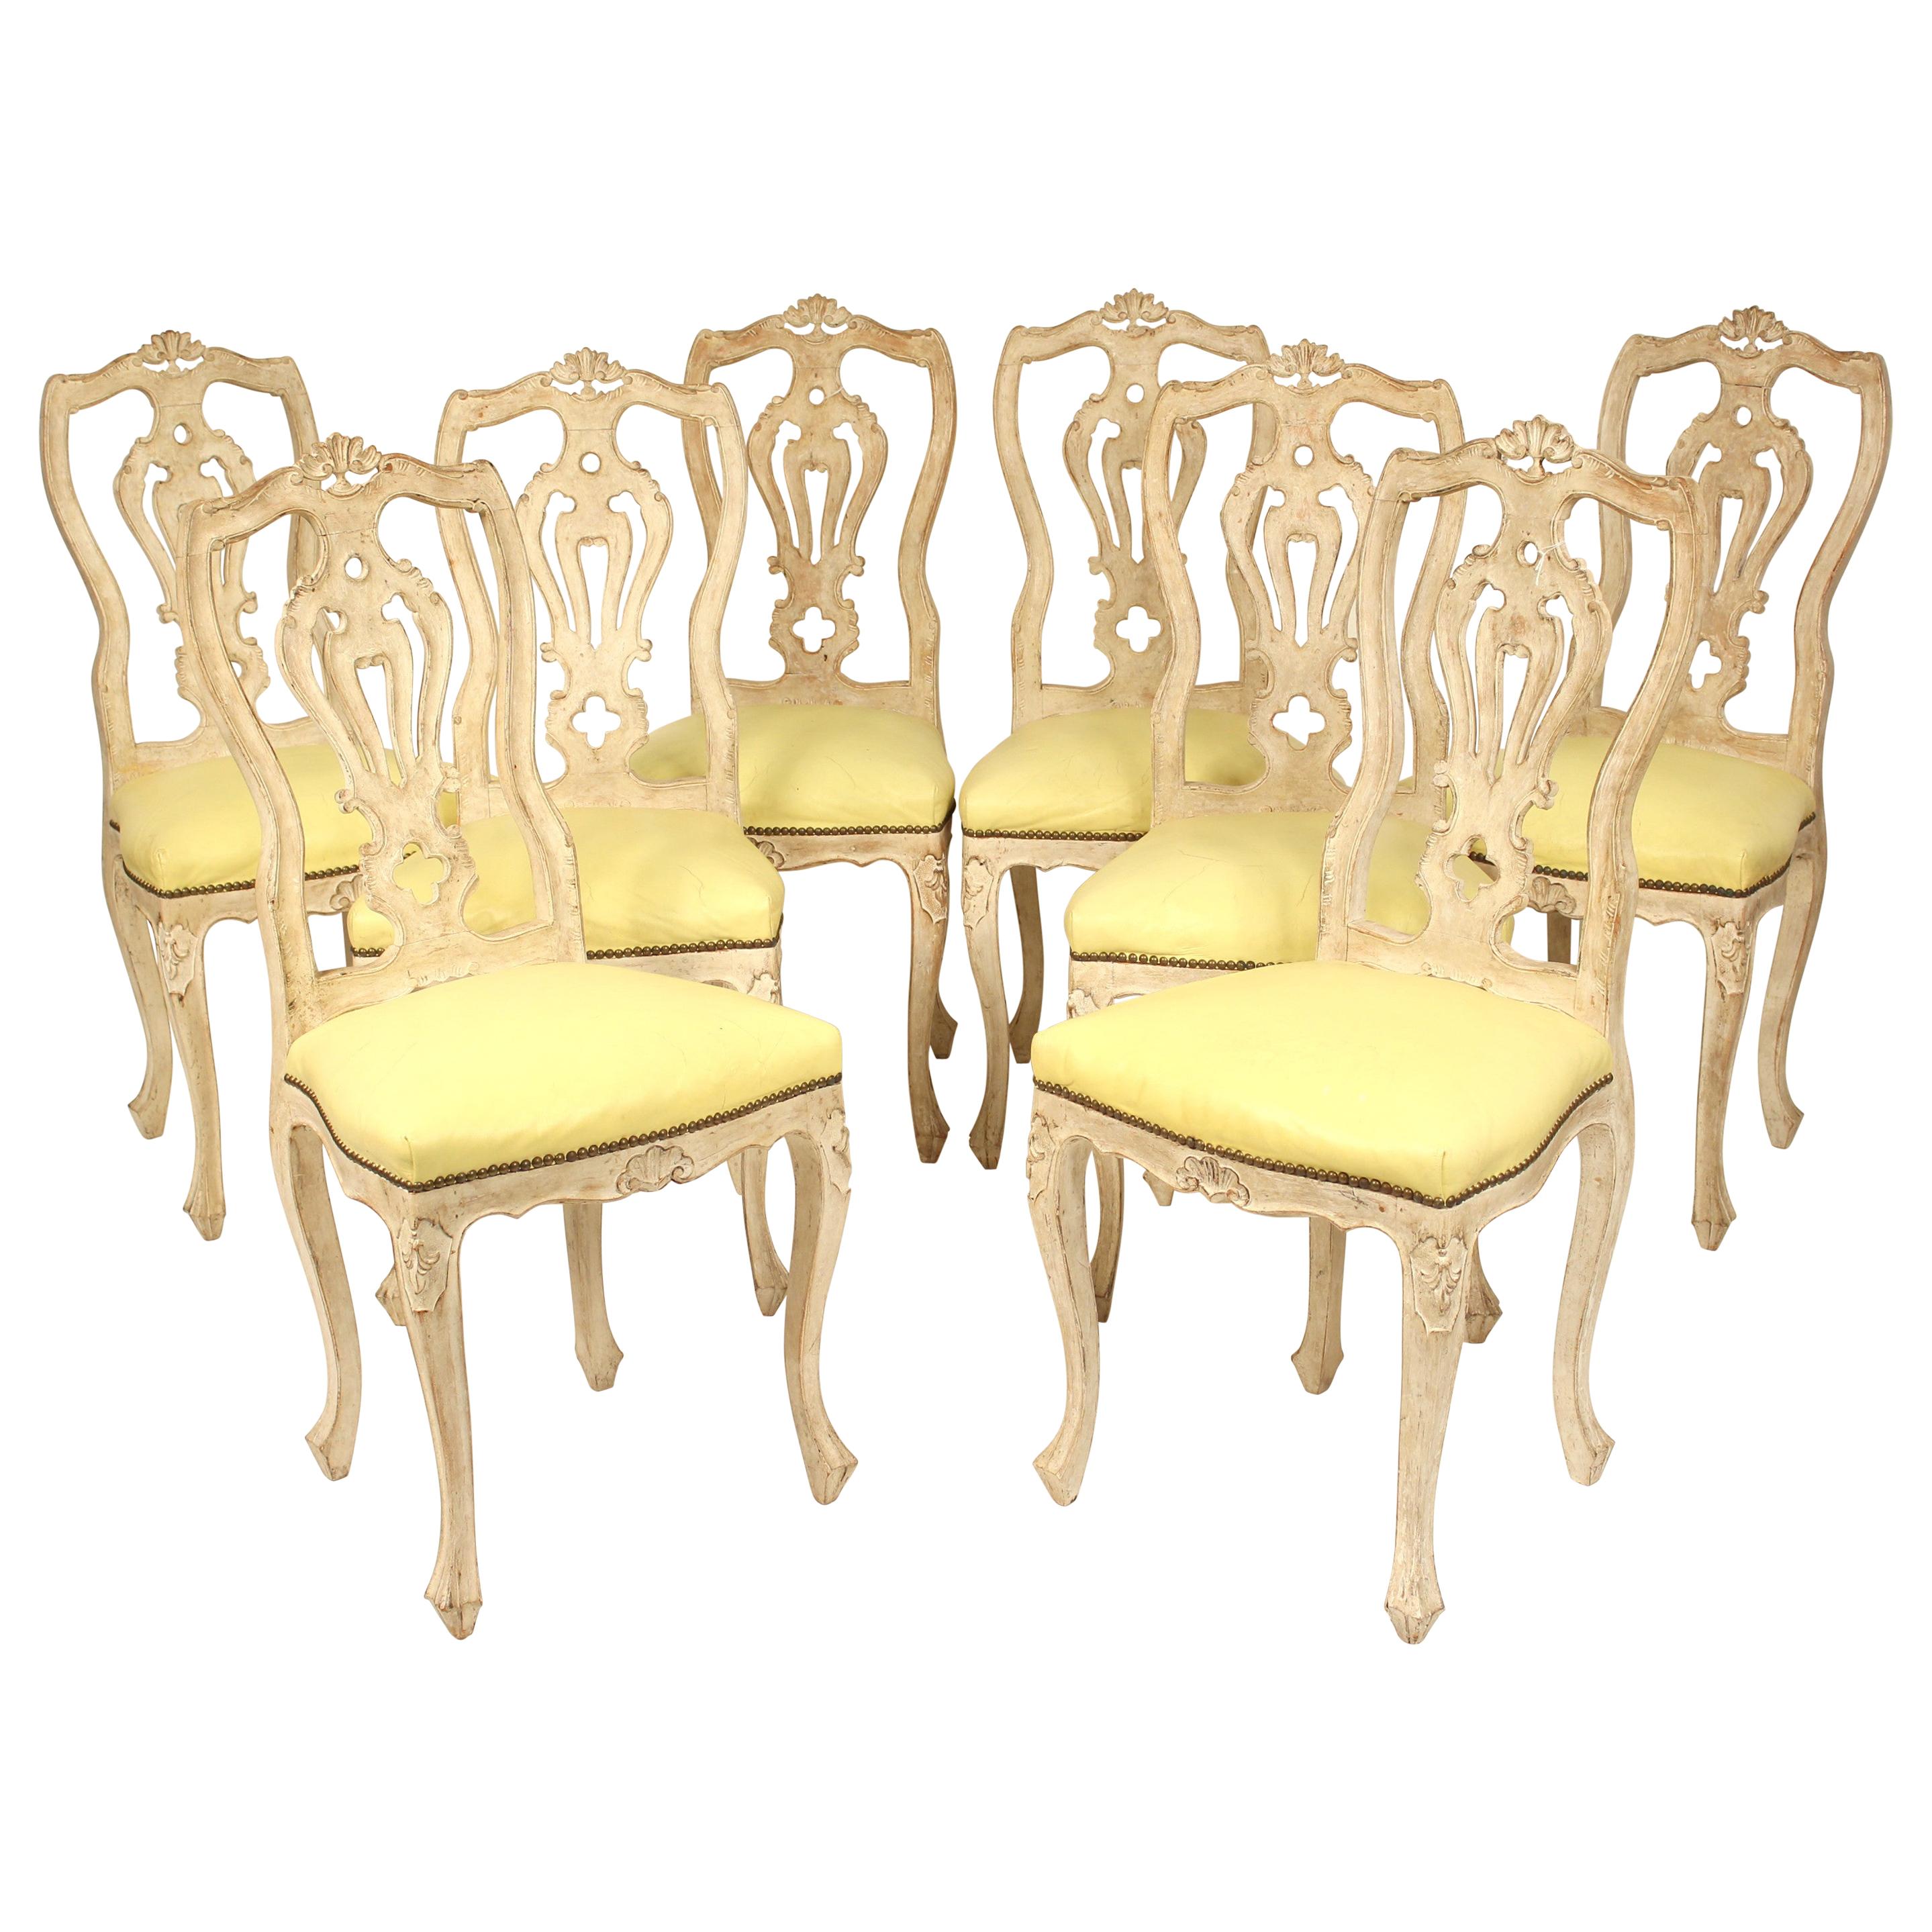 Set of 8 Continental Painted Louis XV Style Dining Room Chairs